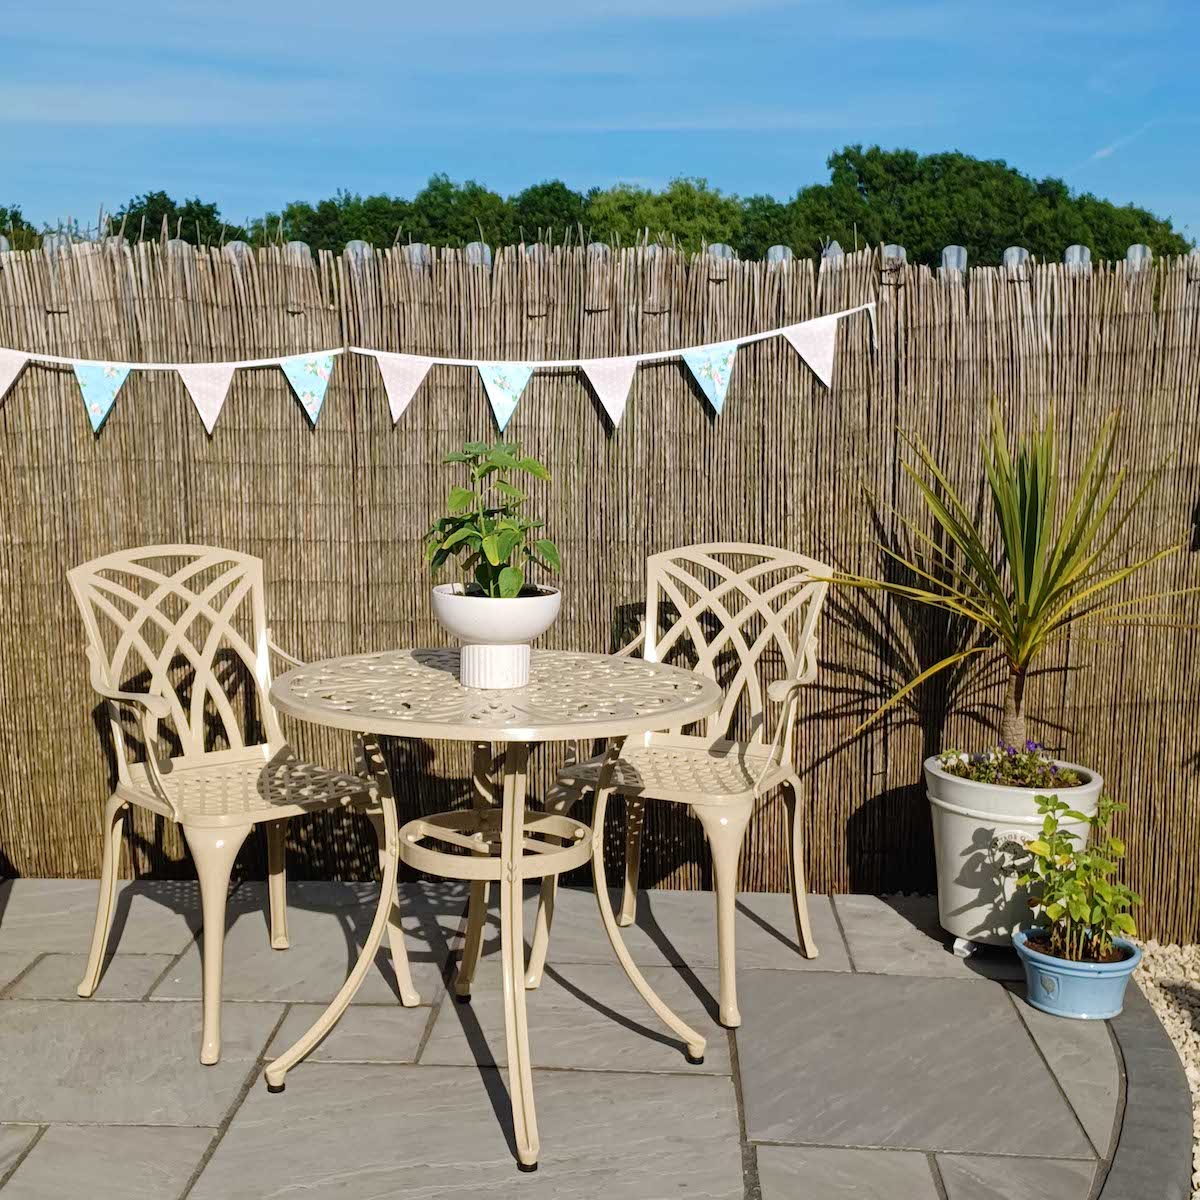 What are the popular types of garden table sets?